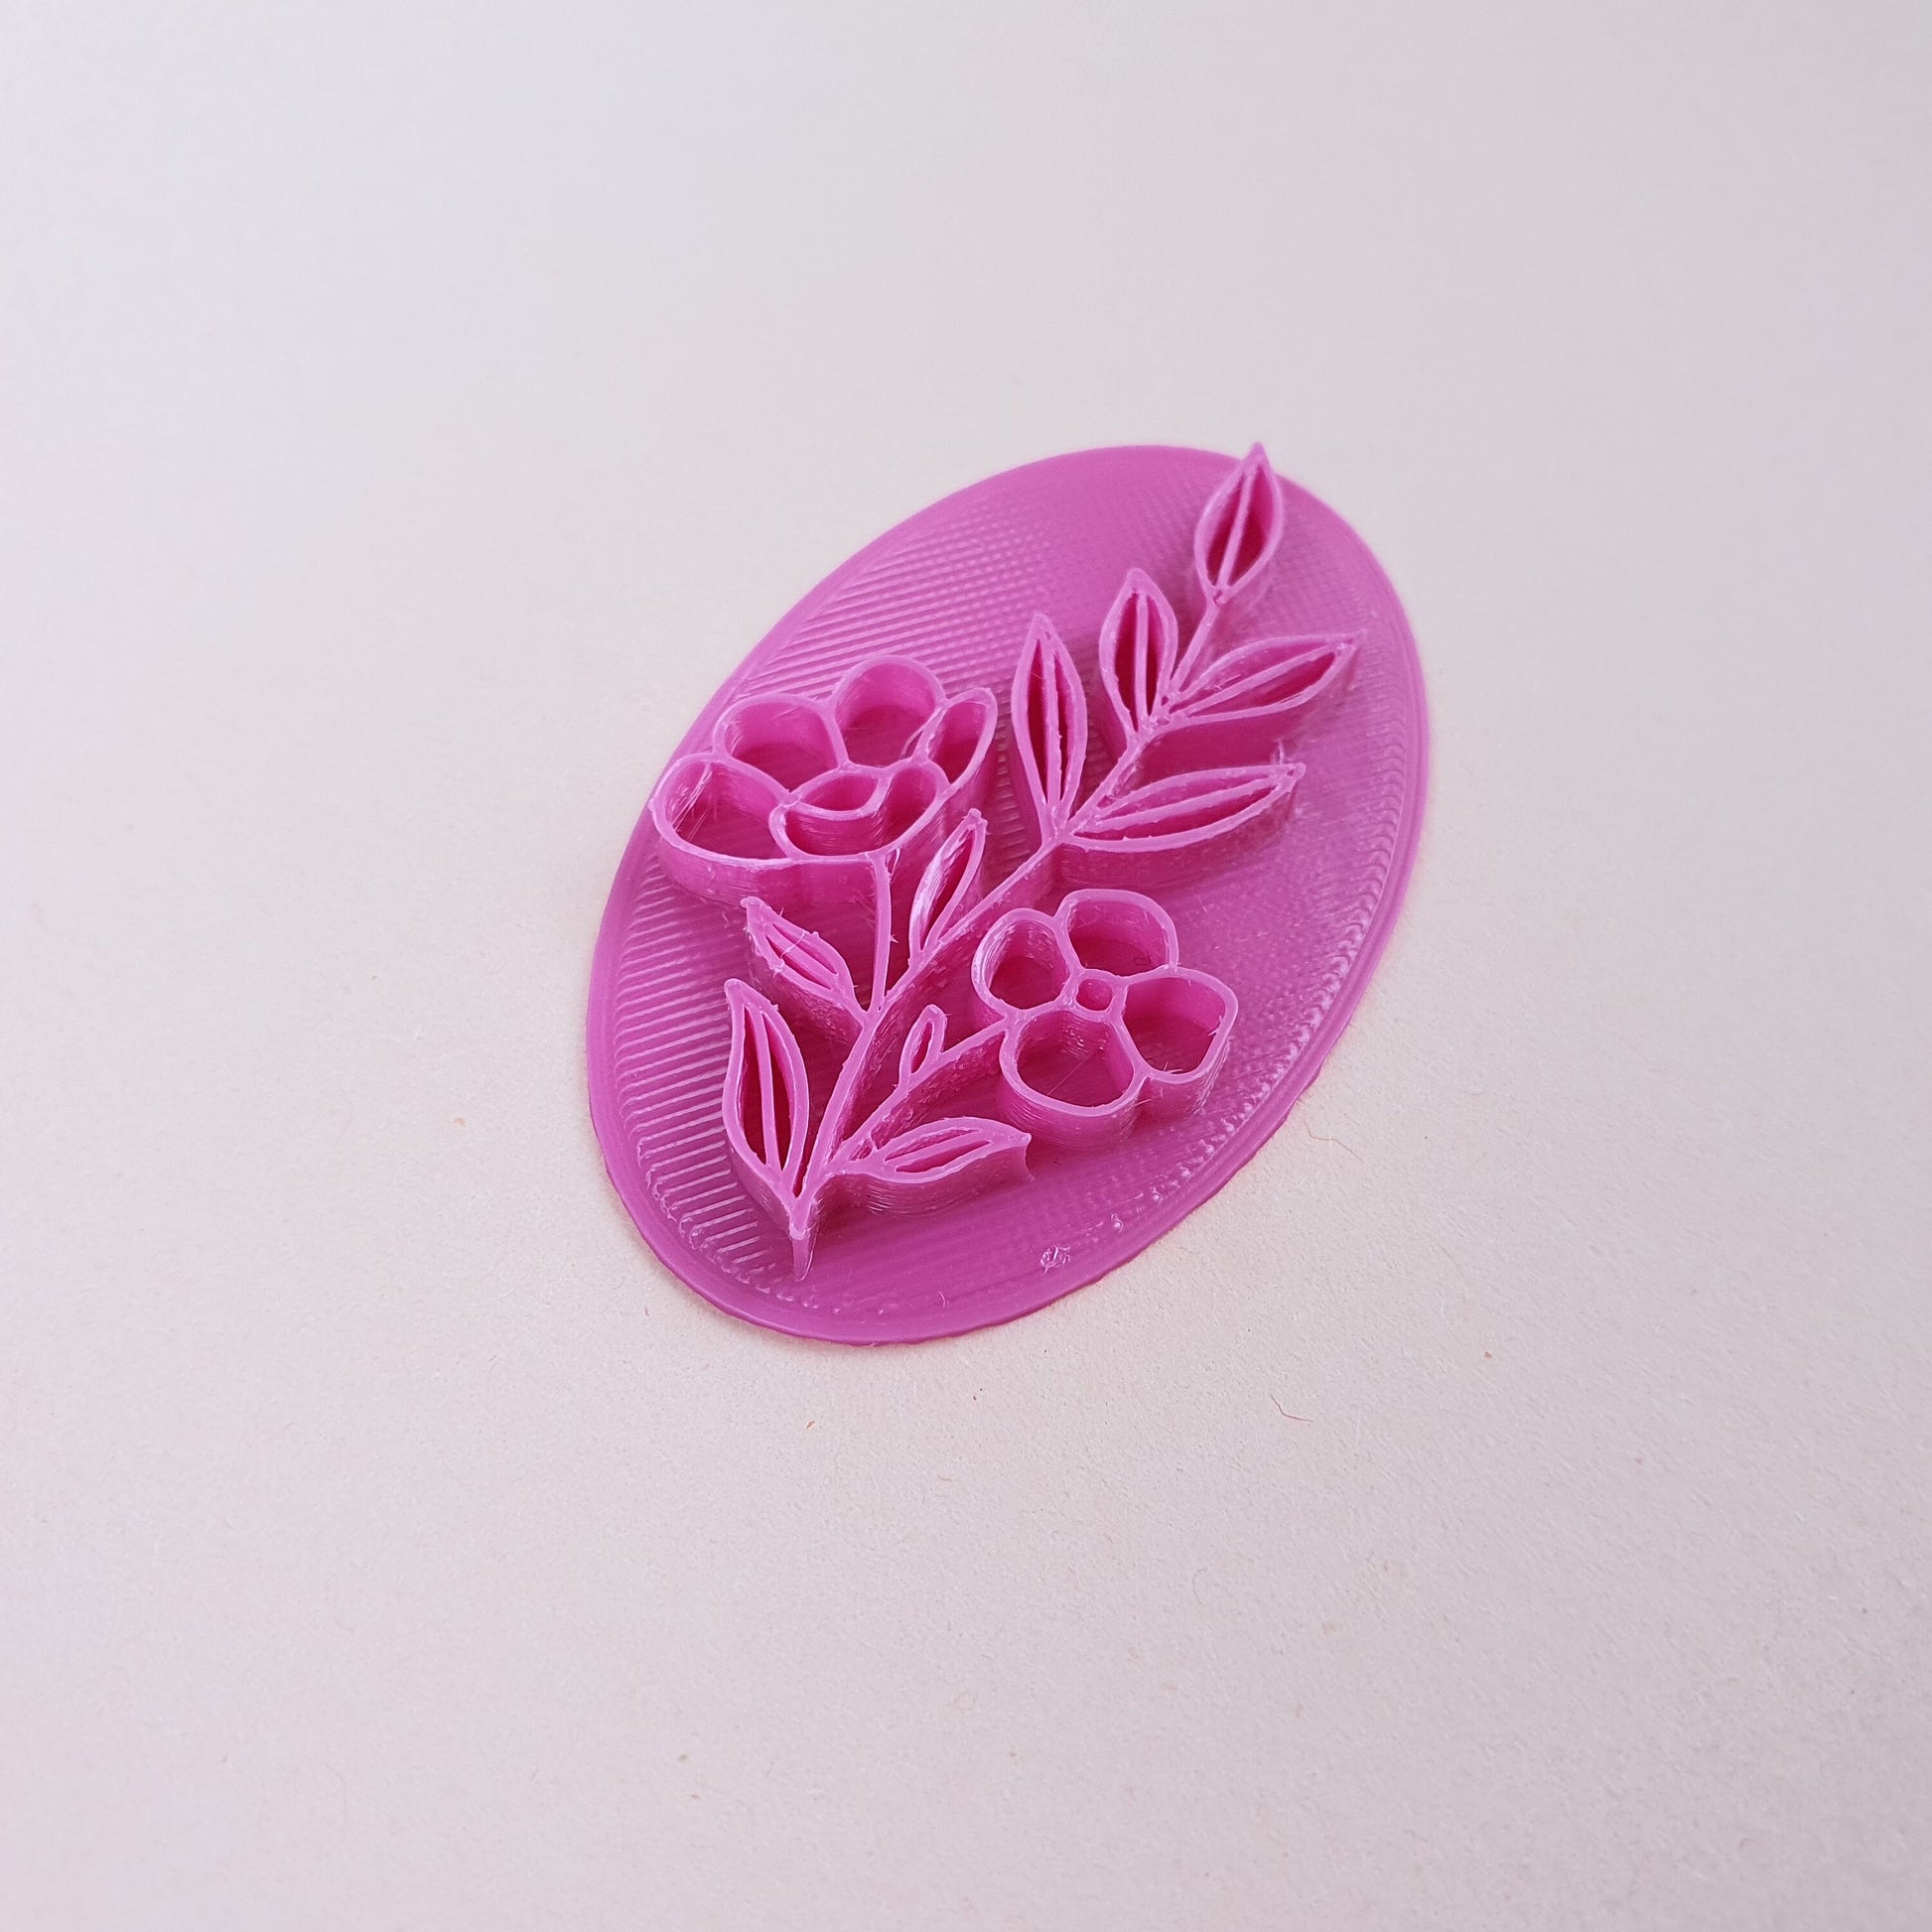 Polymer clay stamp "Flower" 3D printed embossing